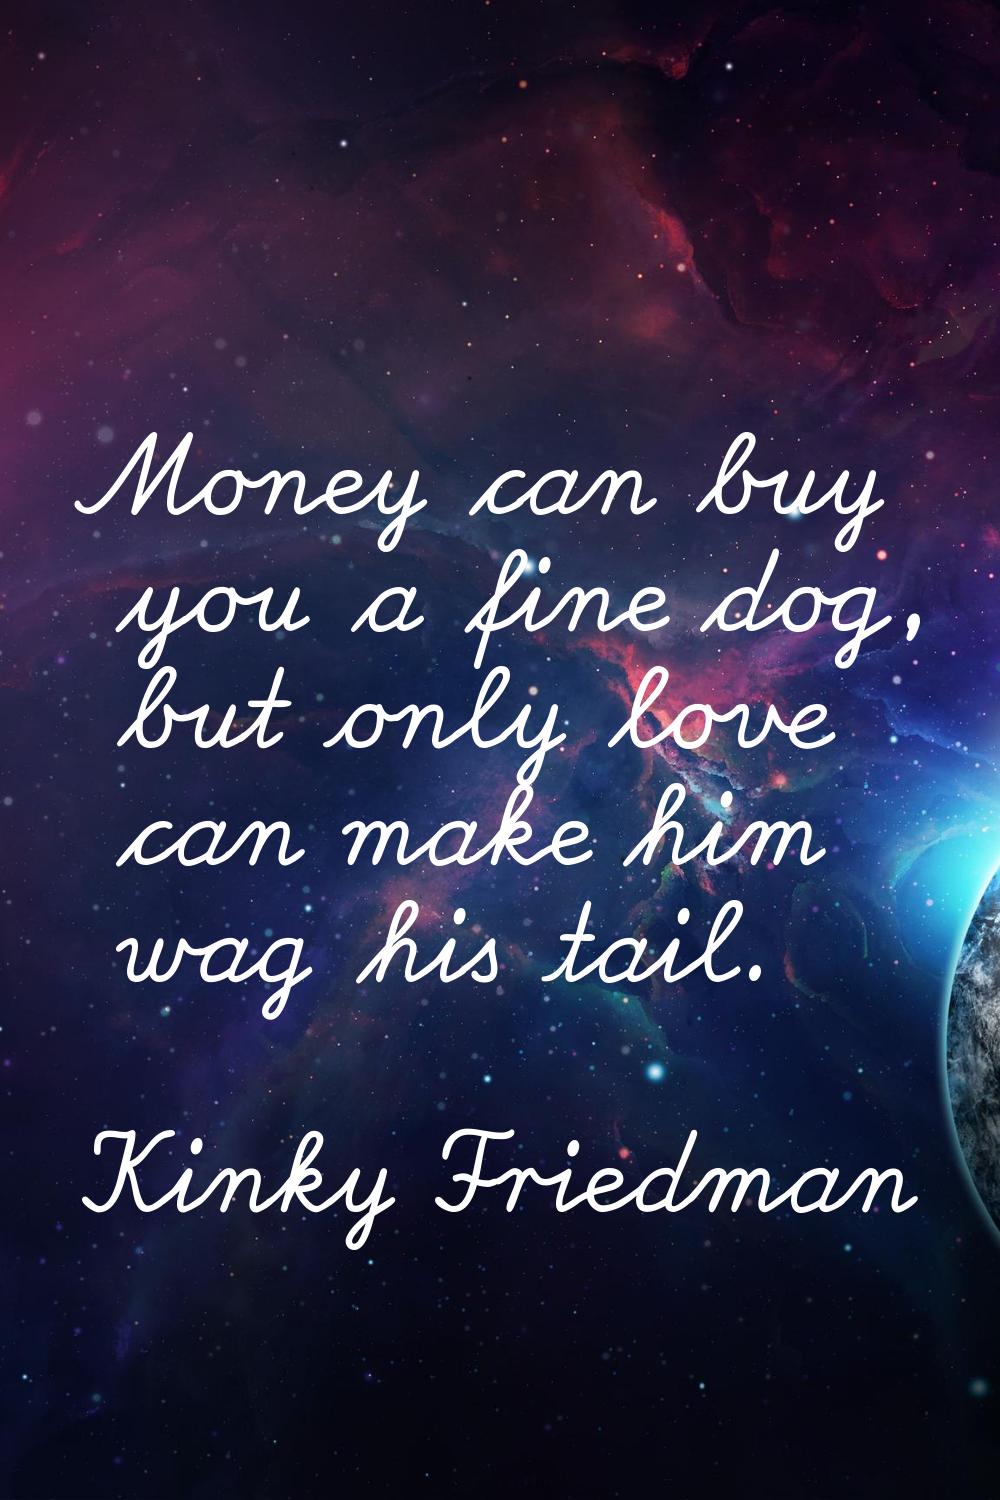 Money can buy you a fine dog, but only love can make him wag his tail.